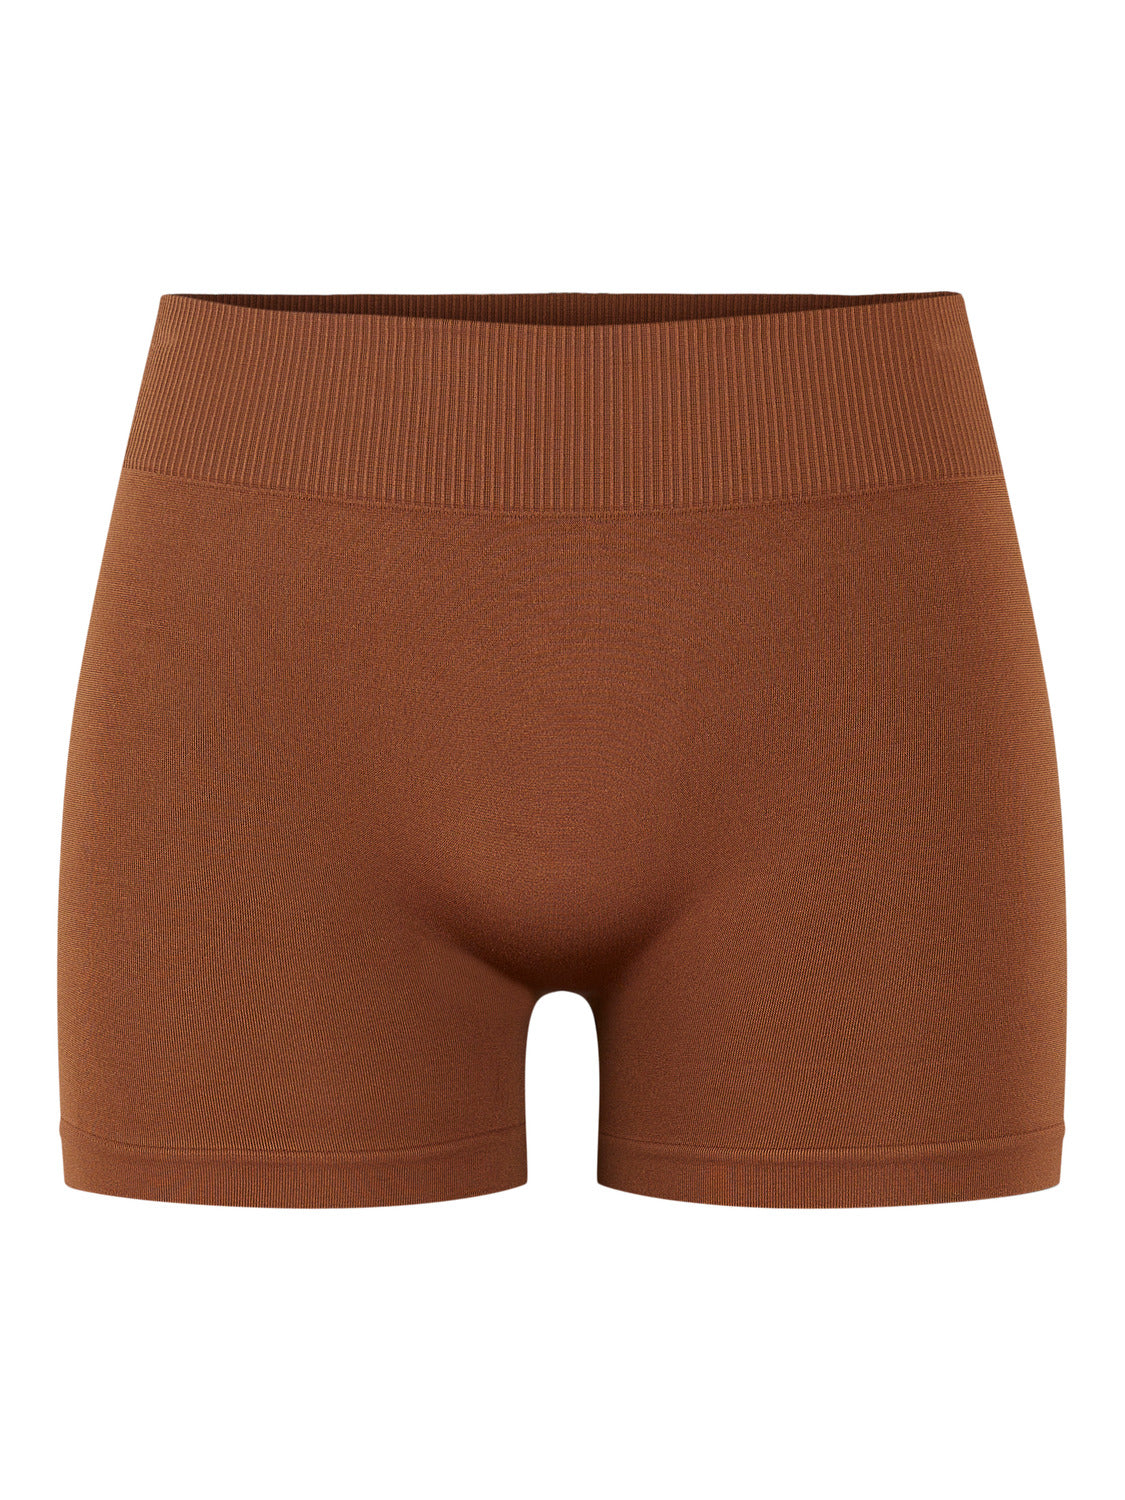 PCLONDON Shorts - Toffee